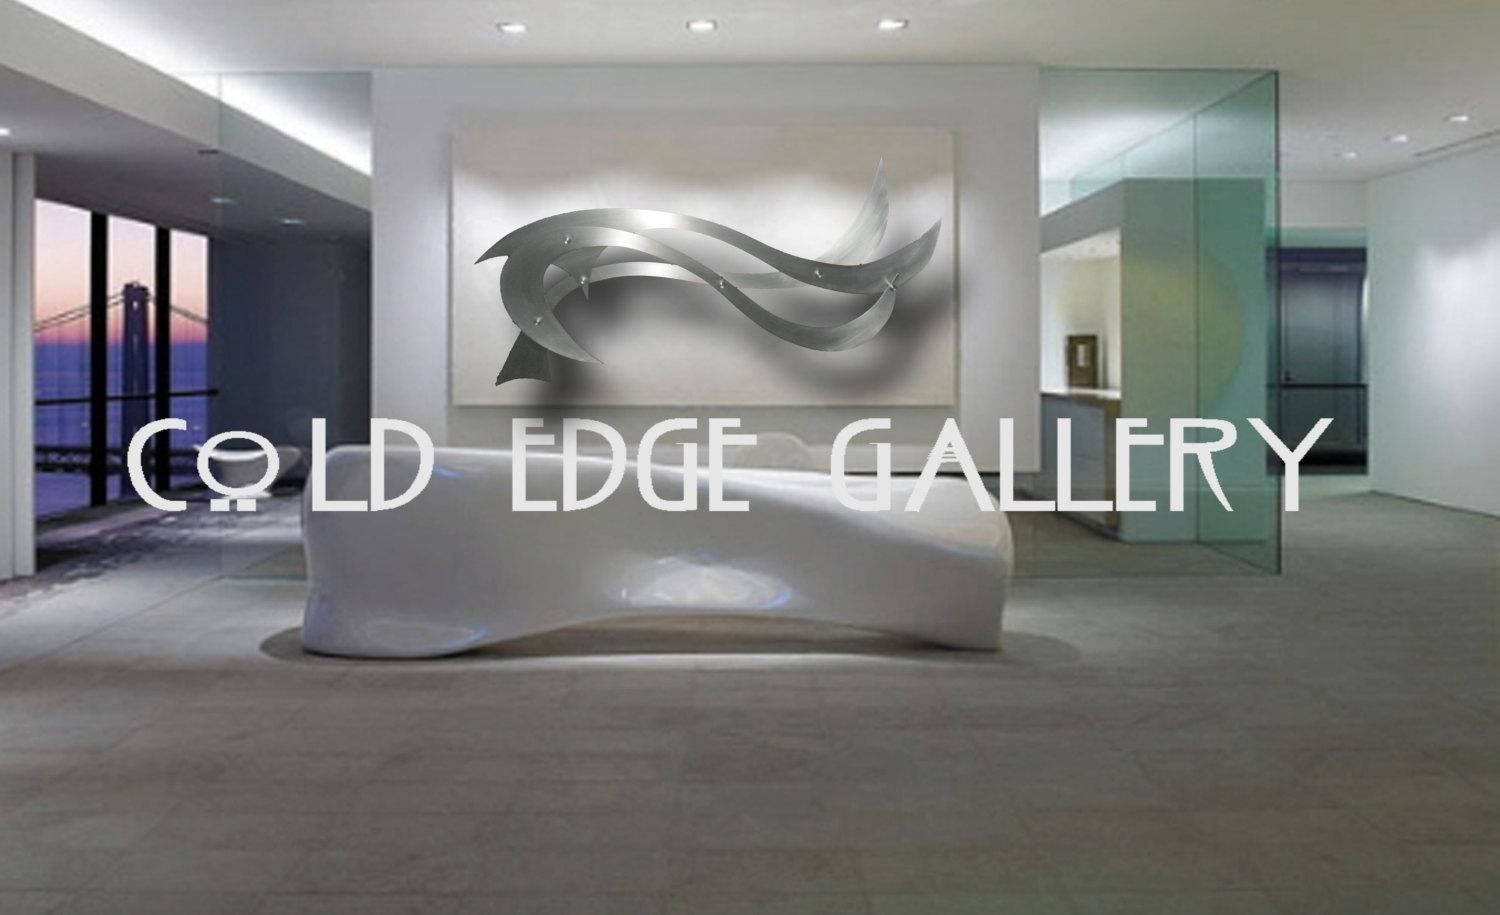 Large Metal Wall Art Corporate Wall Art Extra Large Wall With Corporate Wall Art (View 3 of 20)